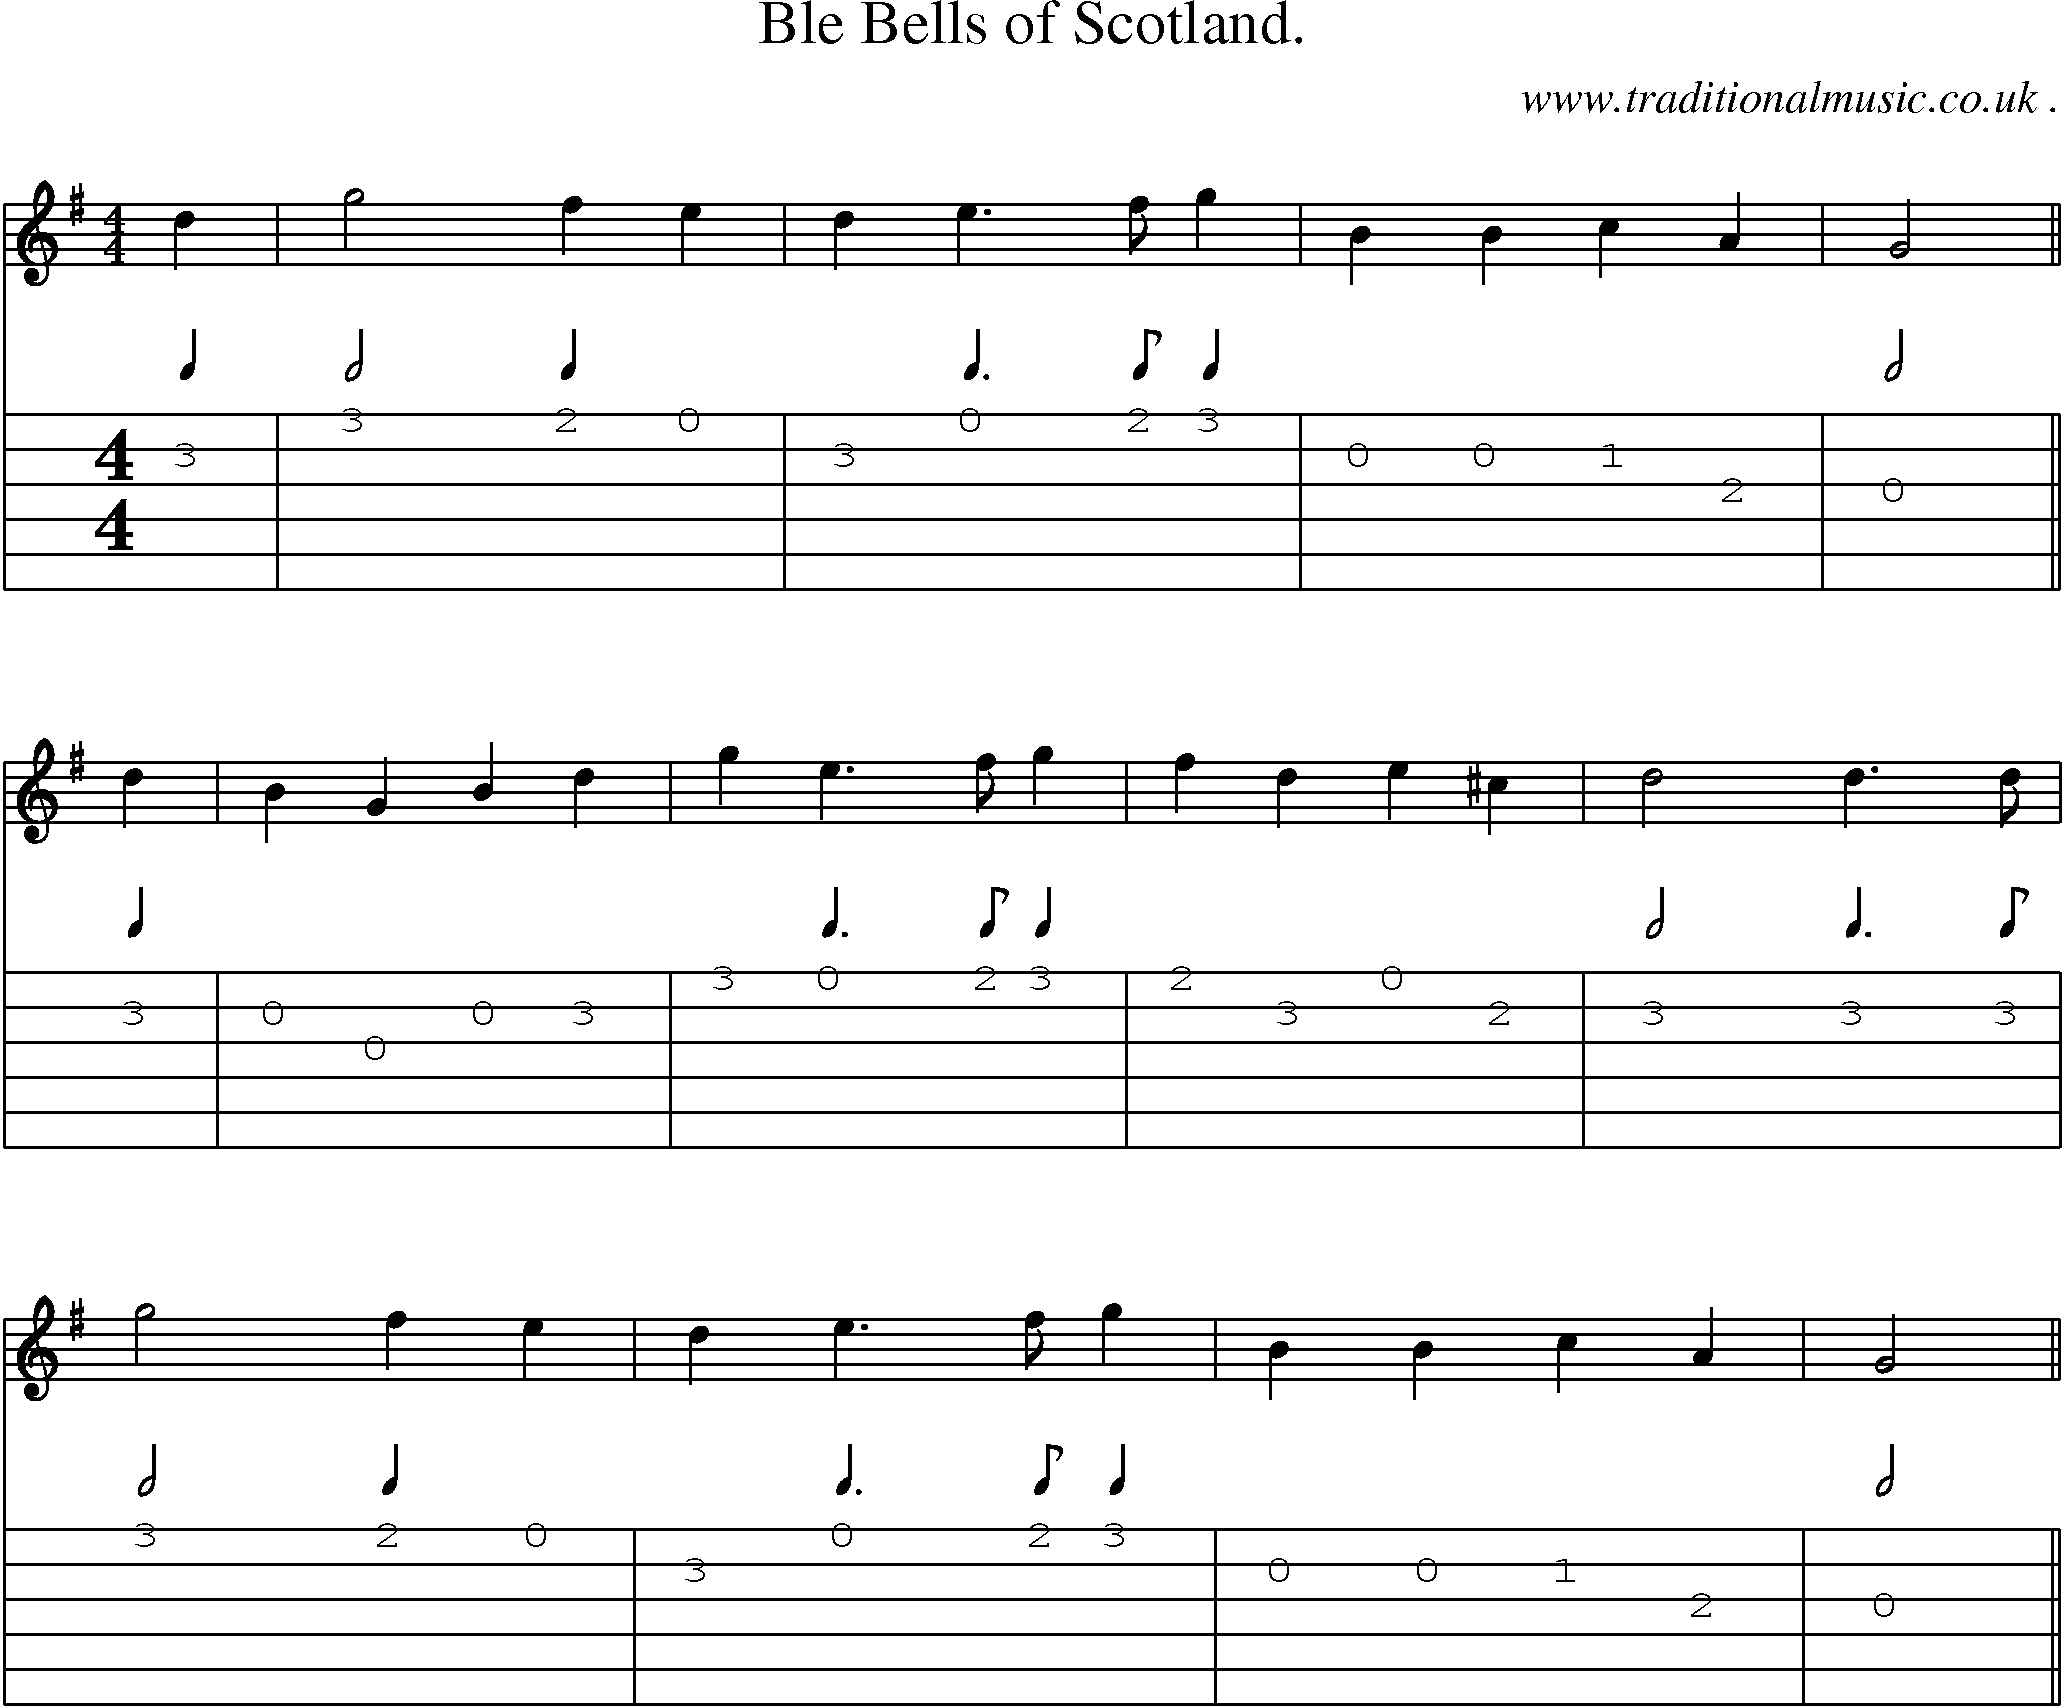 Sheet-Music and Guitar Tabs for Ble Bells of Scotland 